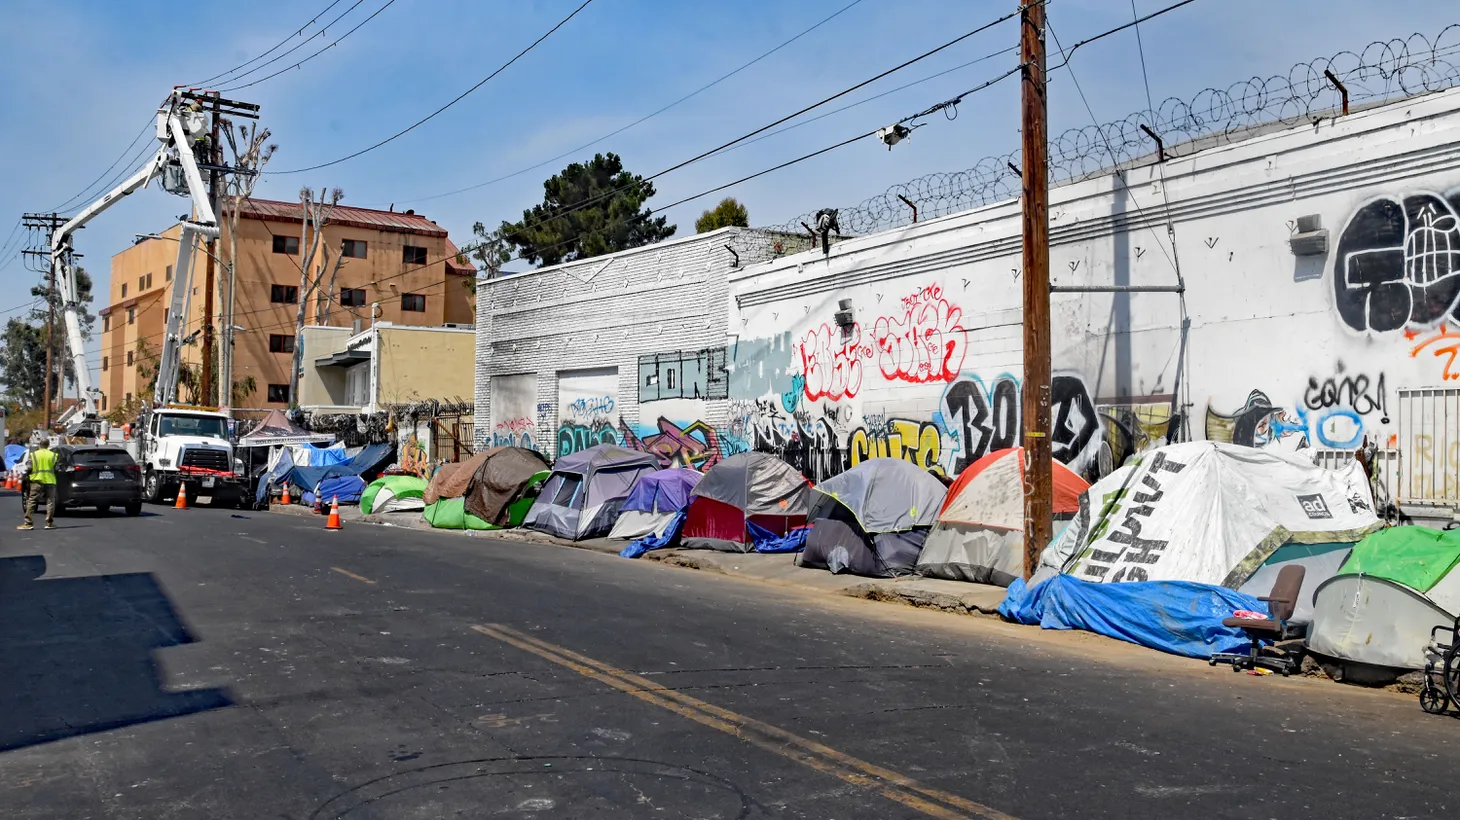 Tent encampments used to be rare on Skid Row. Now they take up ...